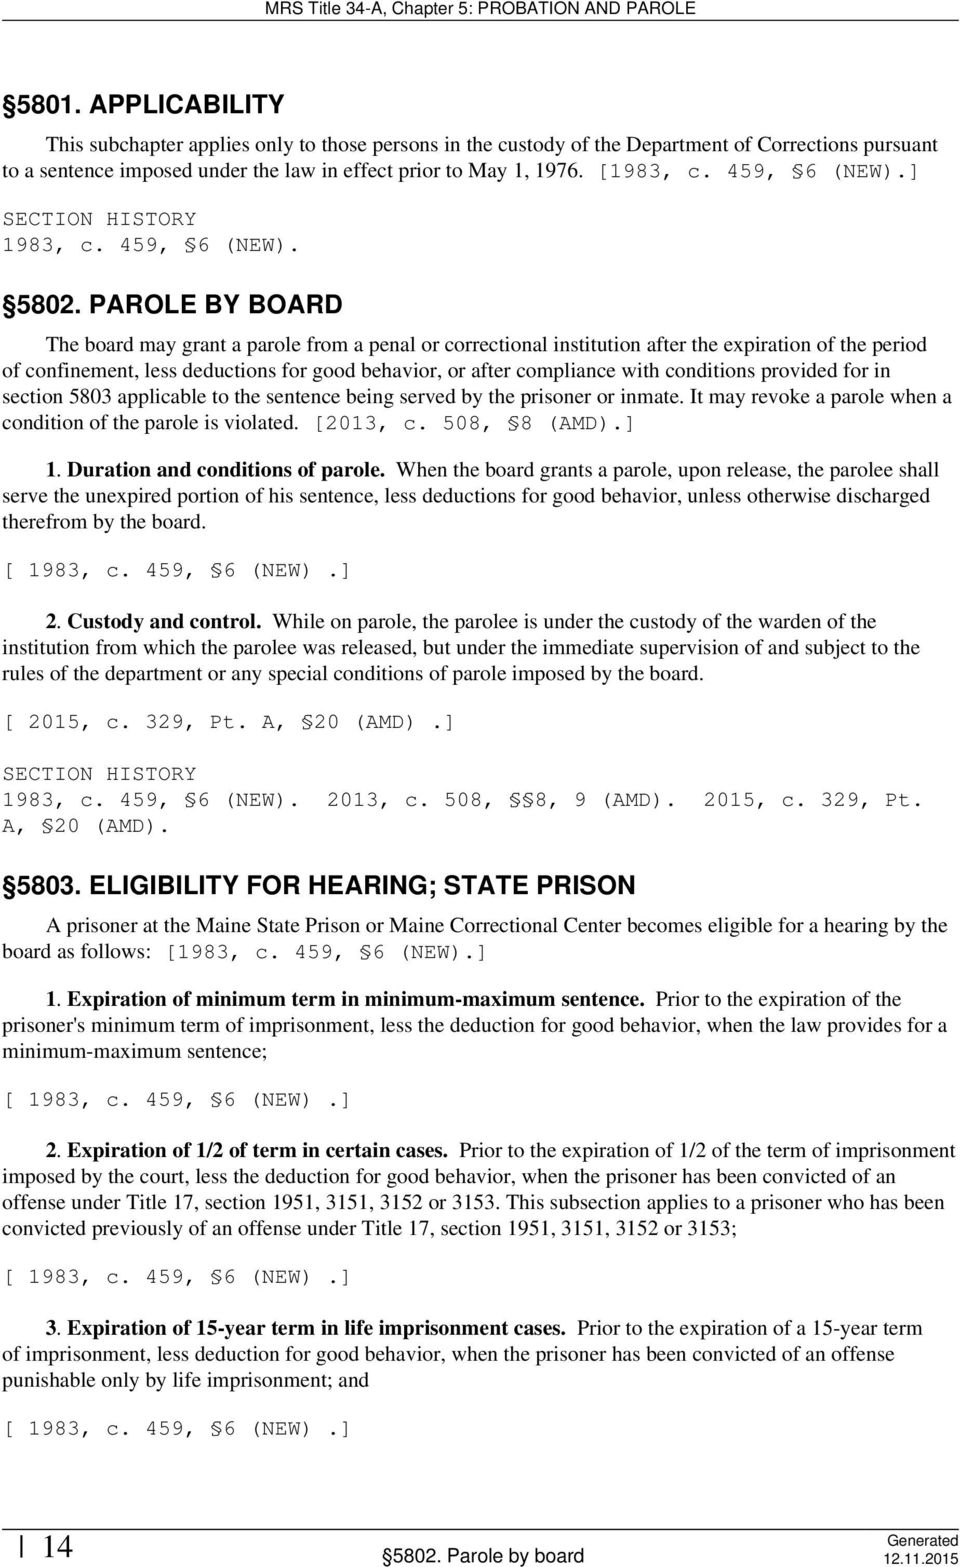 conditions provided for in section 5803 applicable to the sentence being served by the prisoner or inmate. It may revoke a parole when a condition of the parole is violated. [2013, c. 508, 8 (AMD).